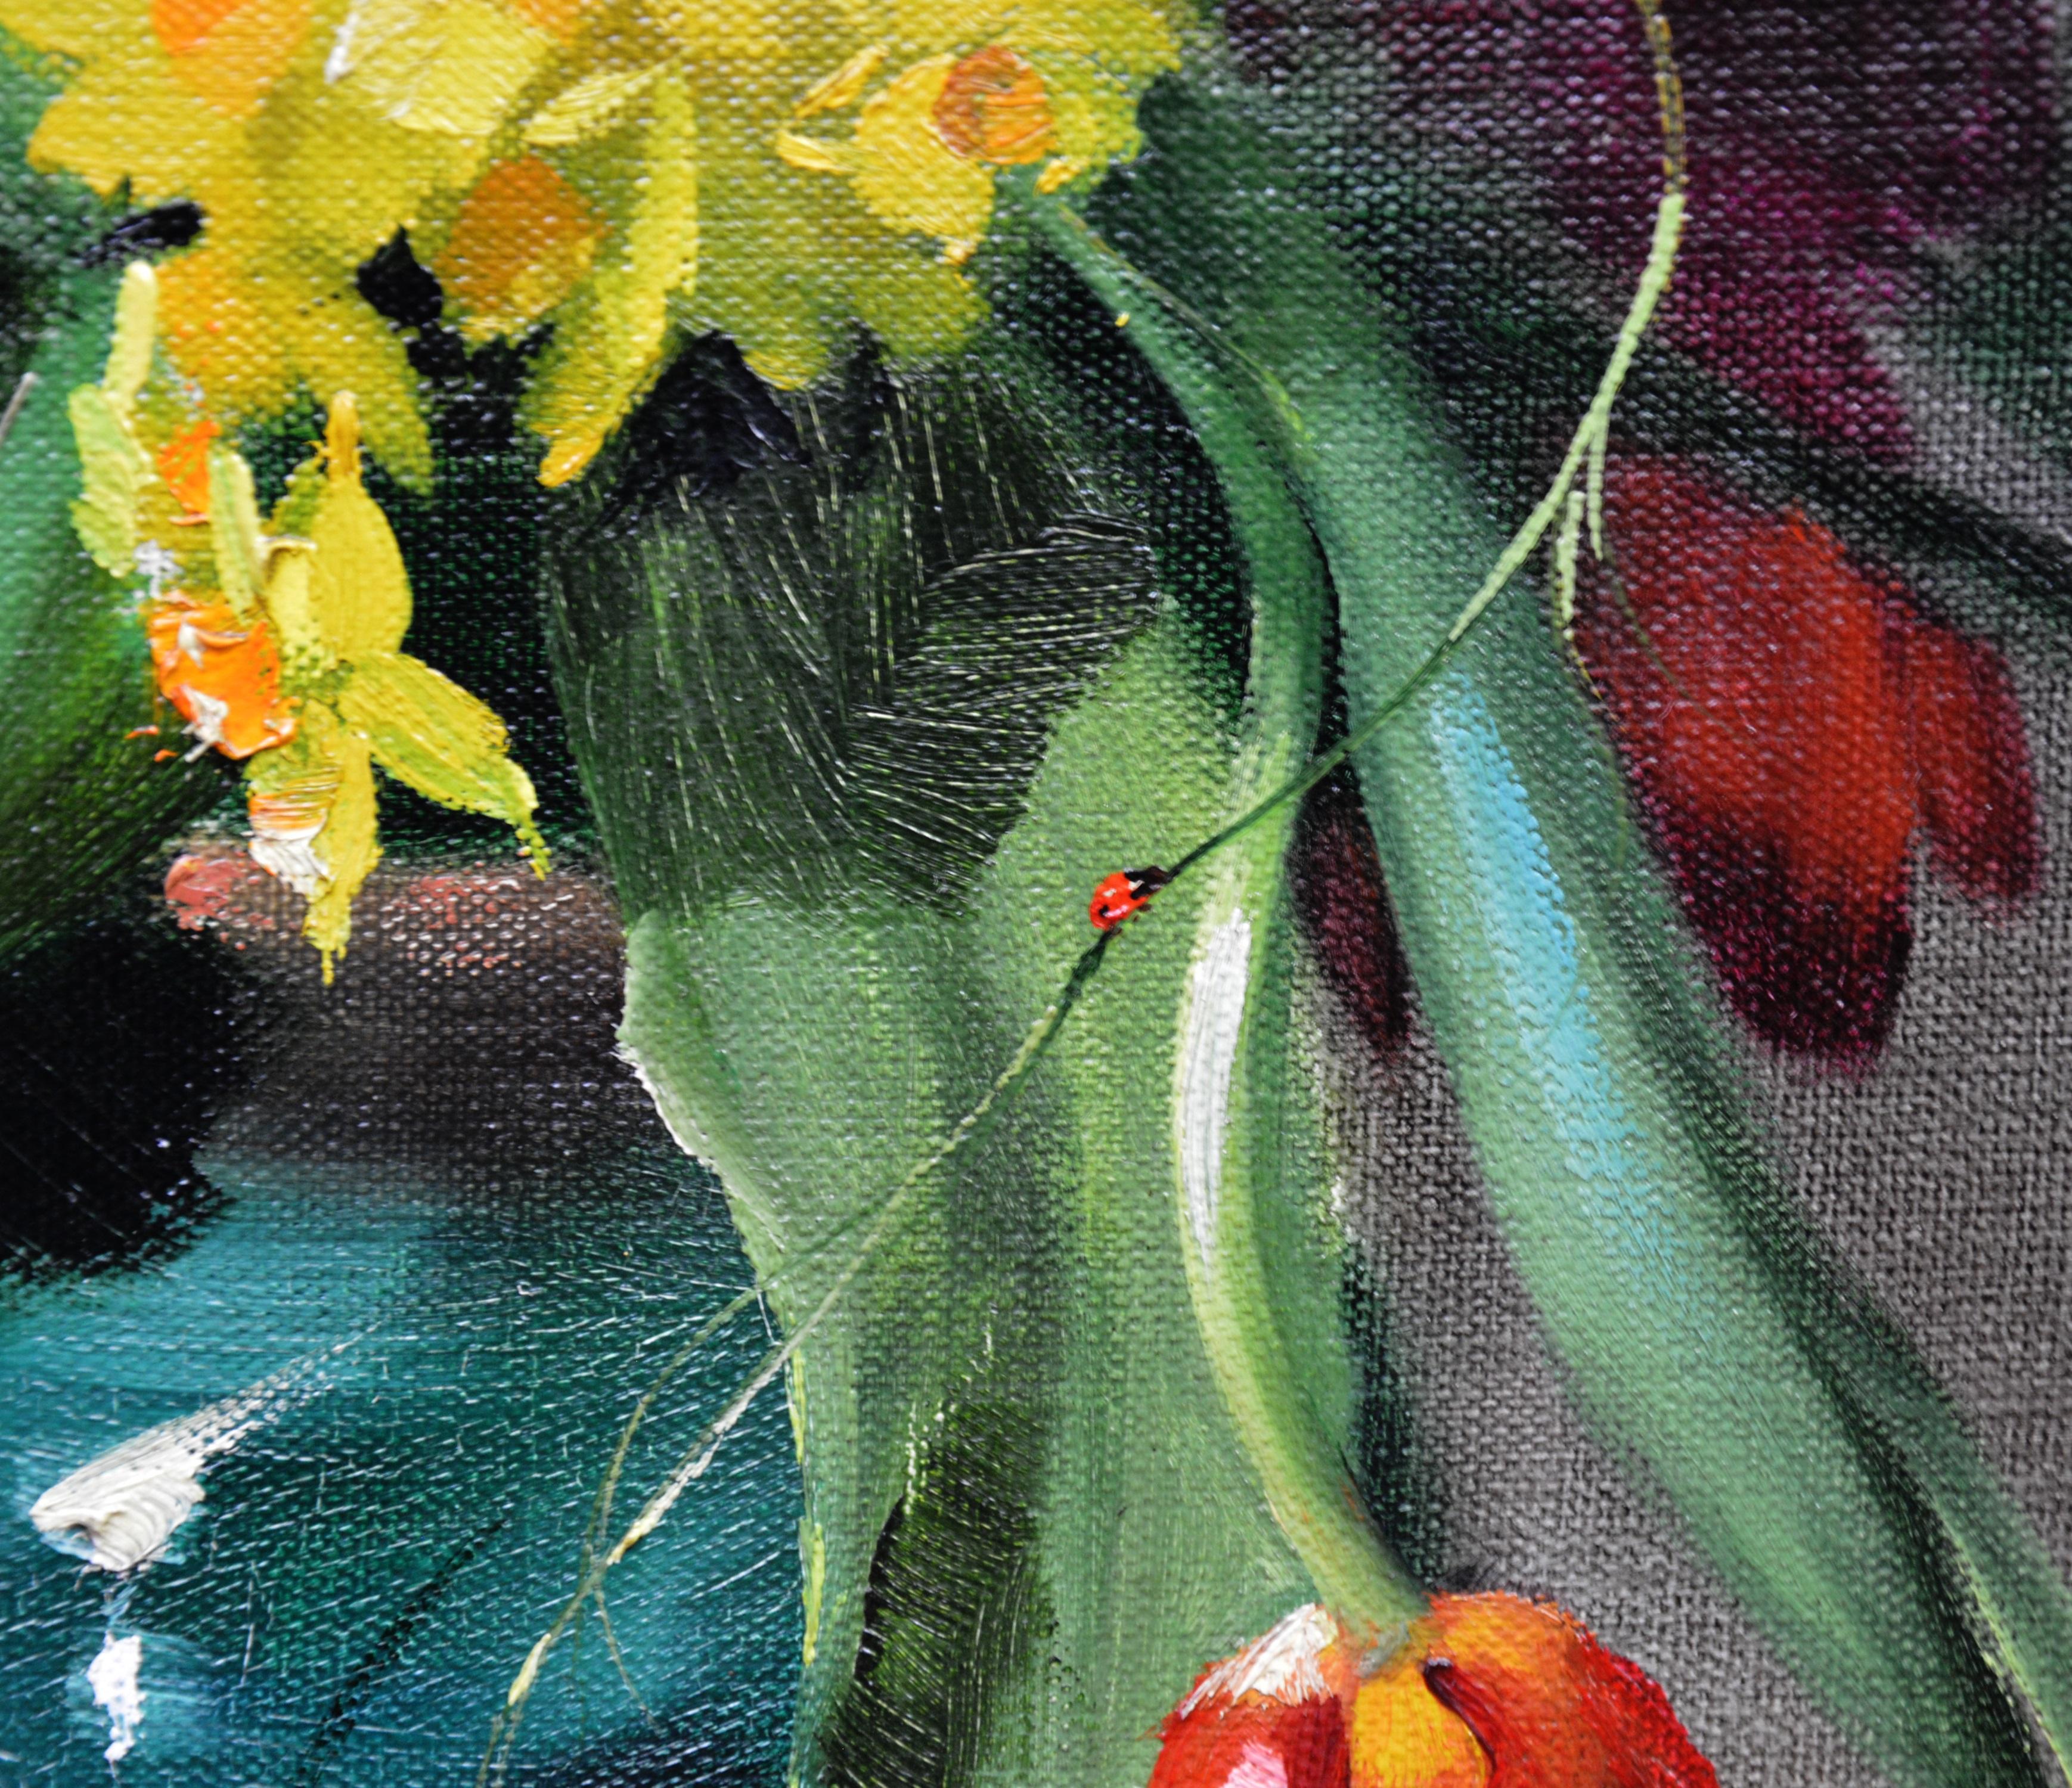 Tulips & Daffodils - Floral Still Life Oil Painting of Spring Flowers 1